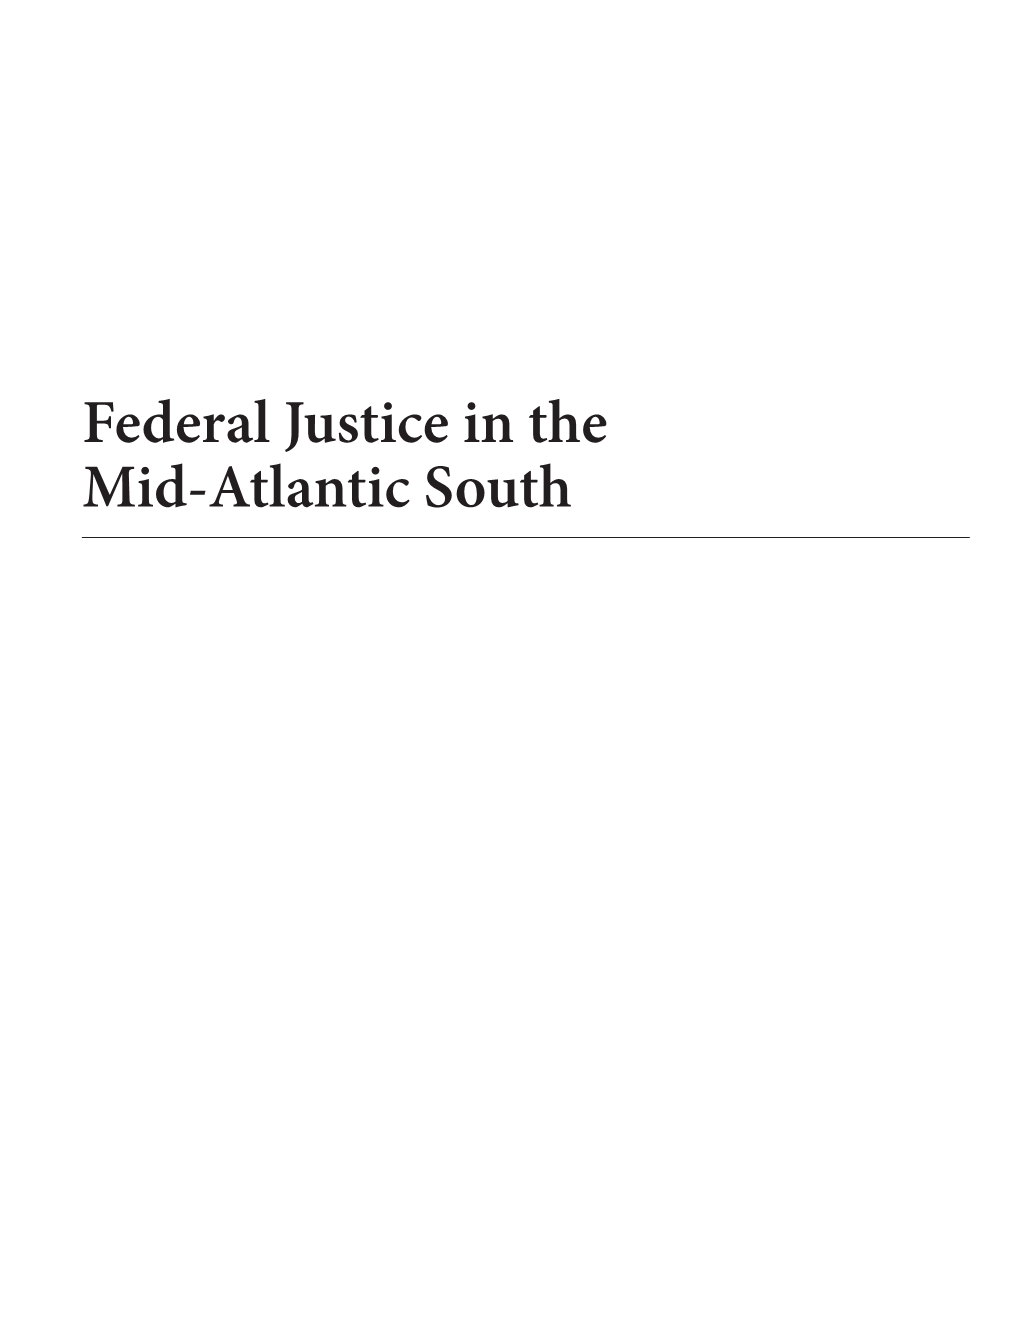 Federal Justice in the Mid-Atlantic South